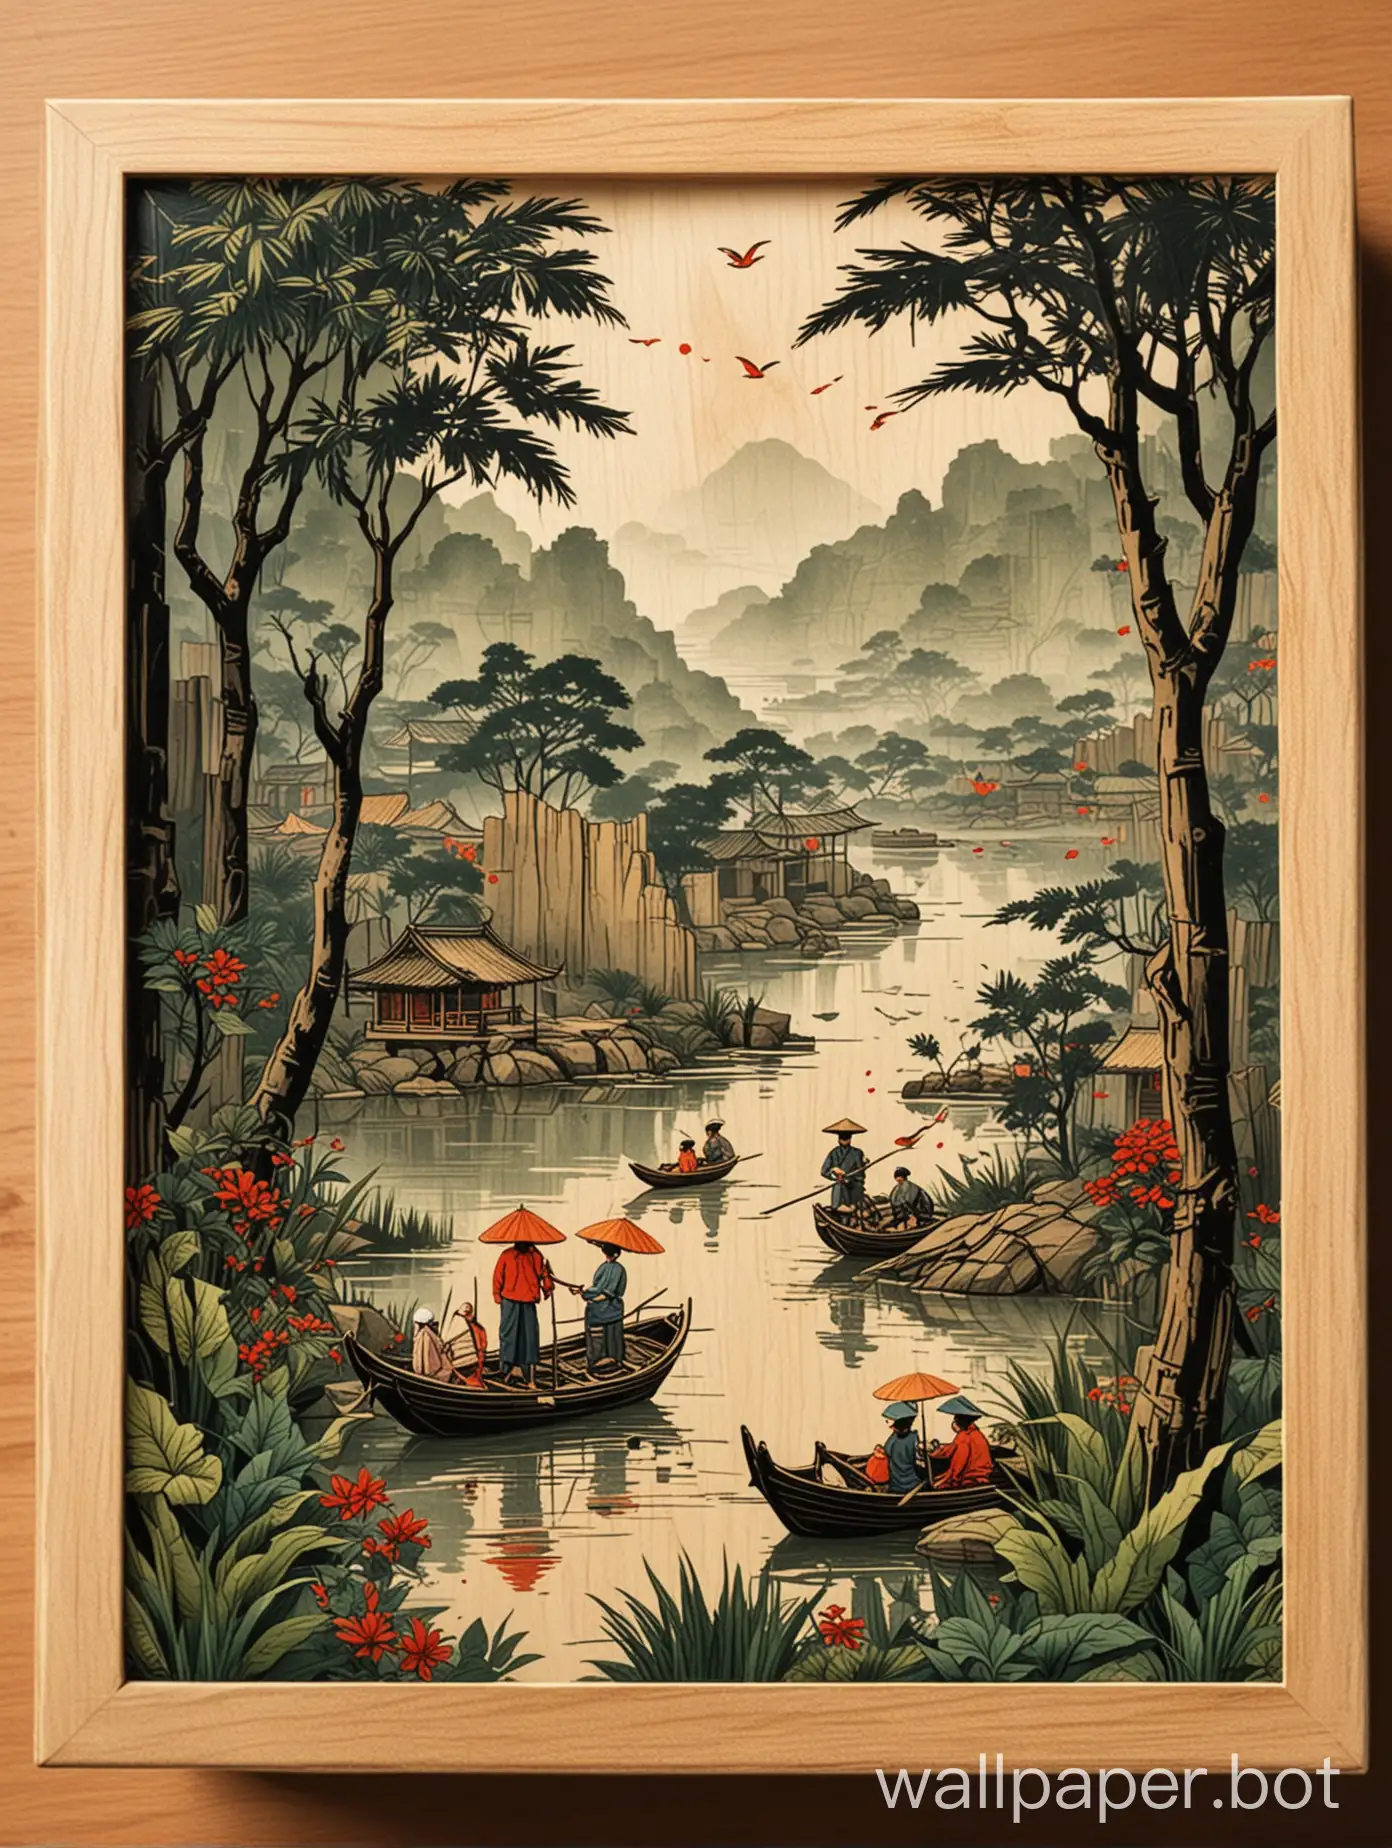  create a Vietnamese traditional scene in a wood block style